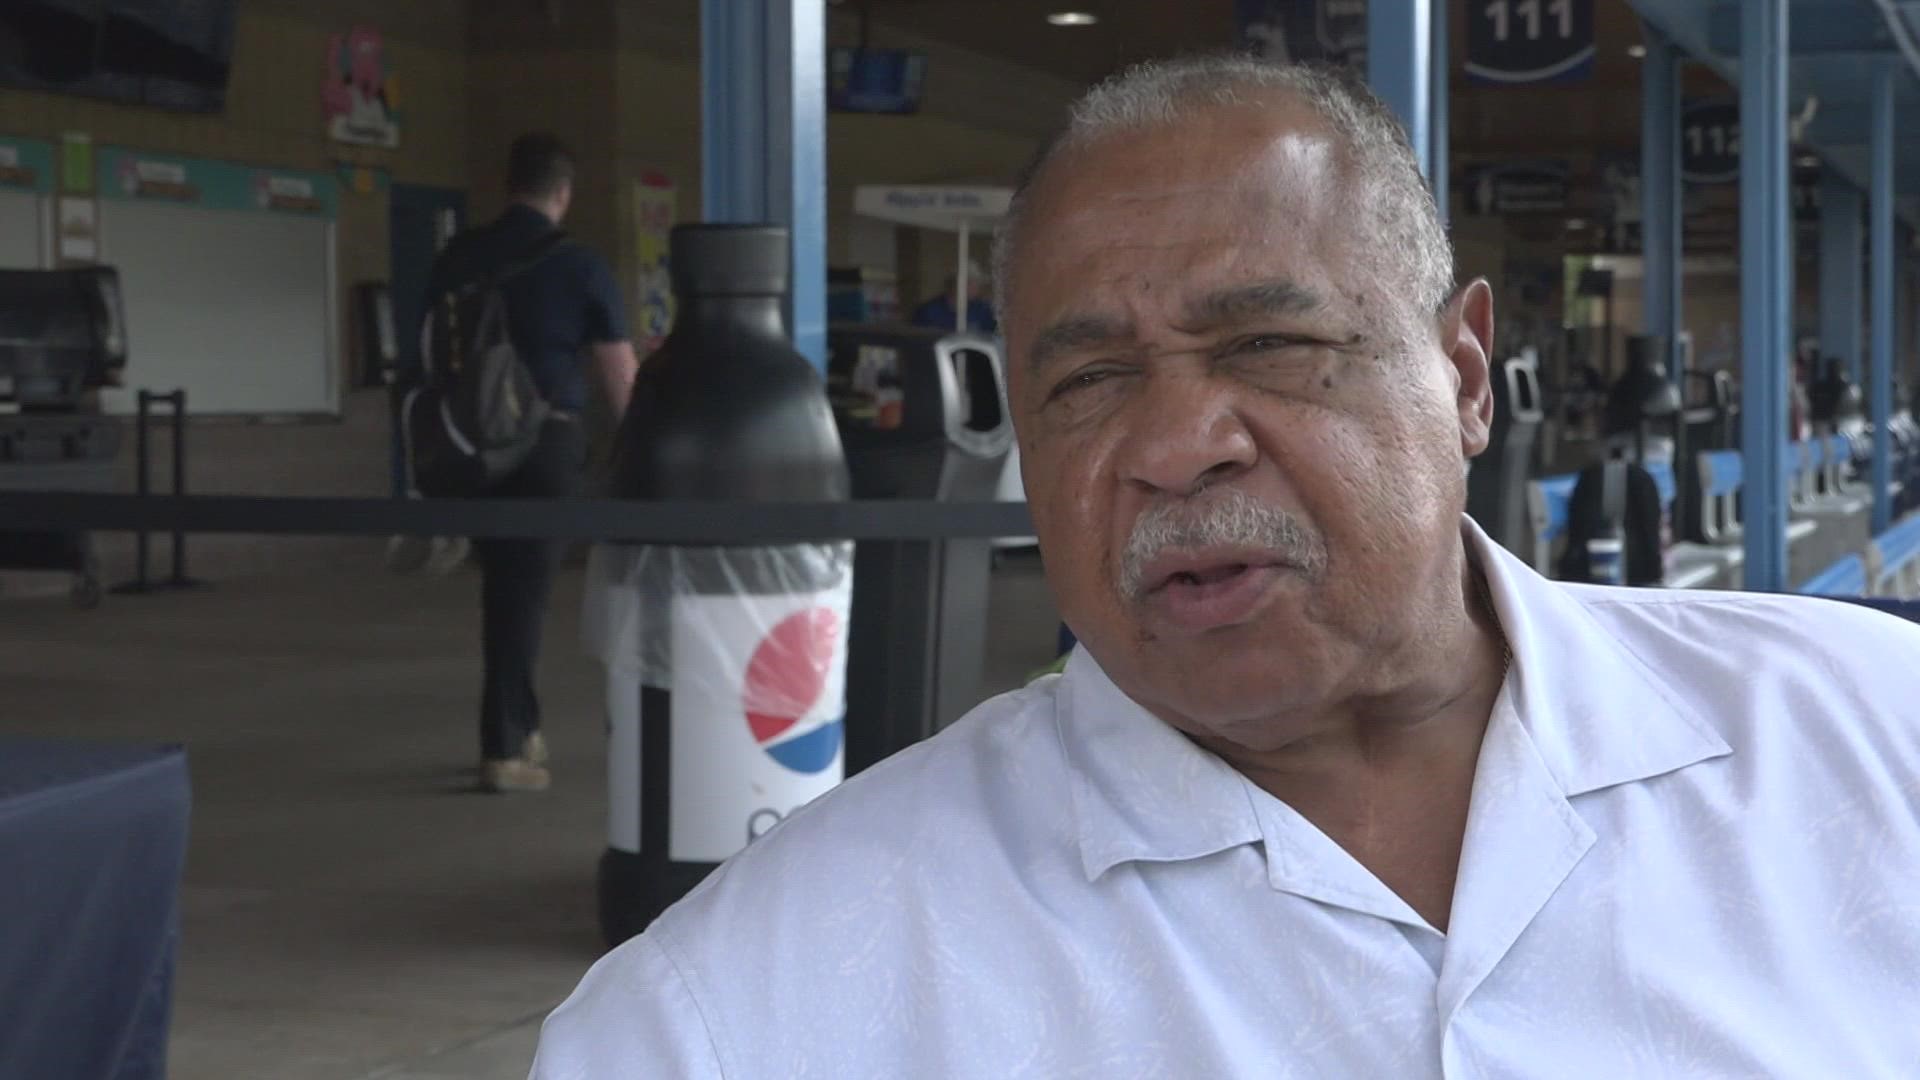 Willie Horton was part of Tiger Wednesdays at LMCU Ballpark. Before signing autographs for fans, he talked with 13 ON YOUR SIDE about the state of the Tigers.